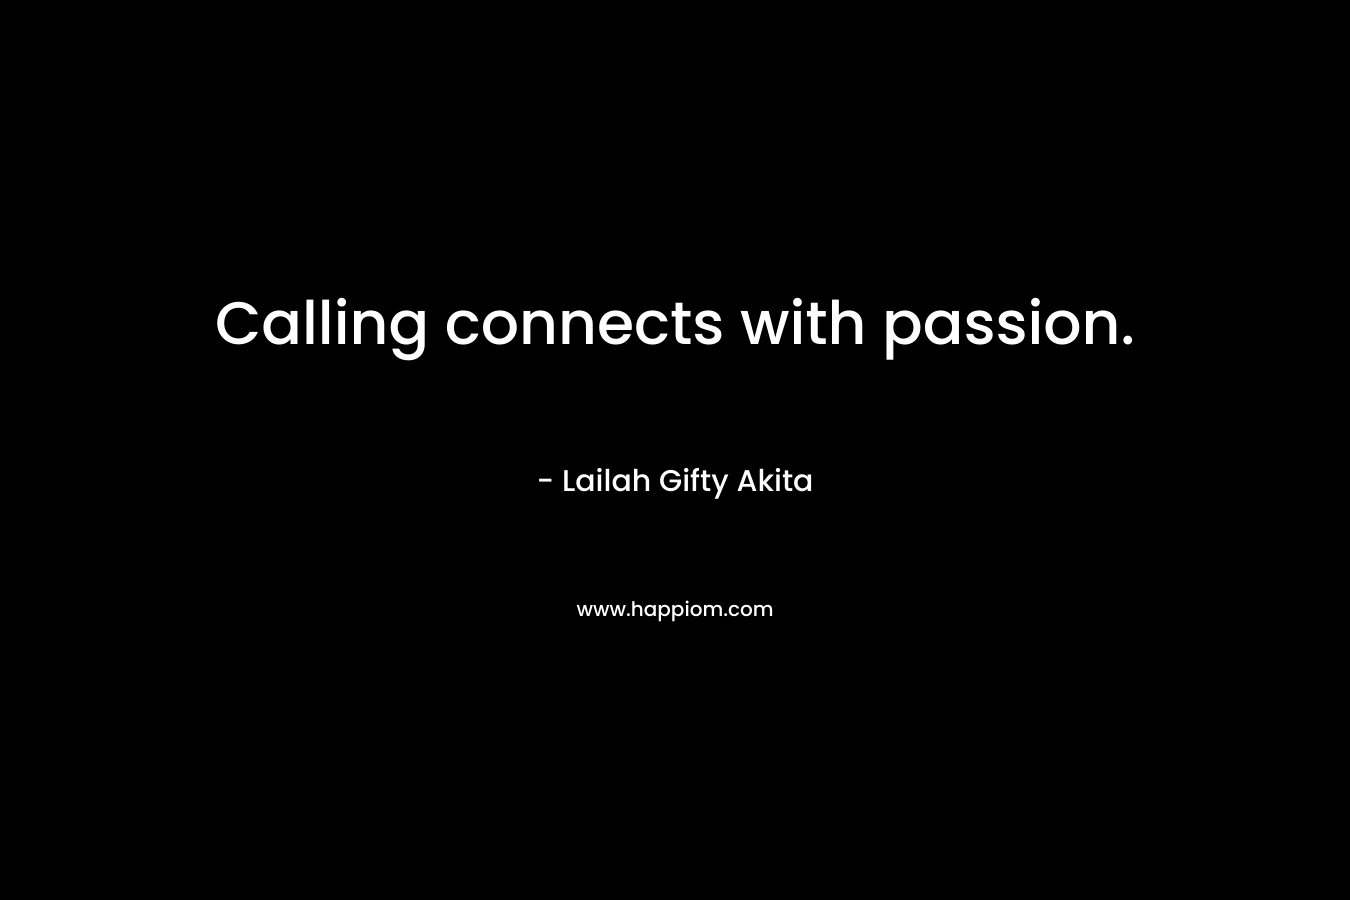 Calling connects with passion.